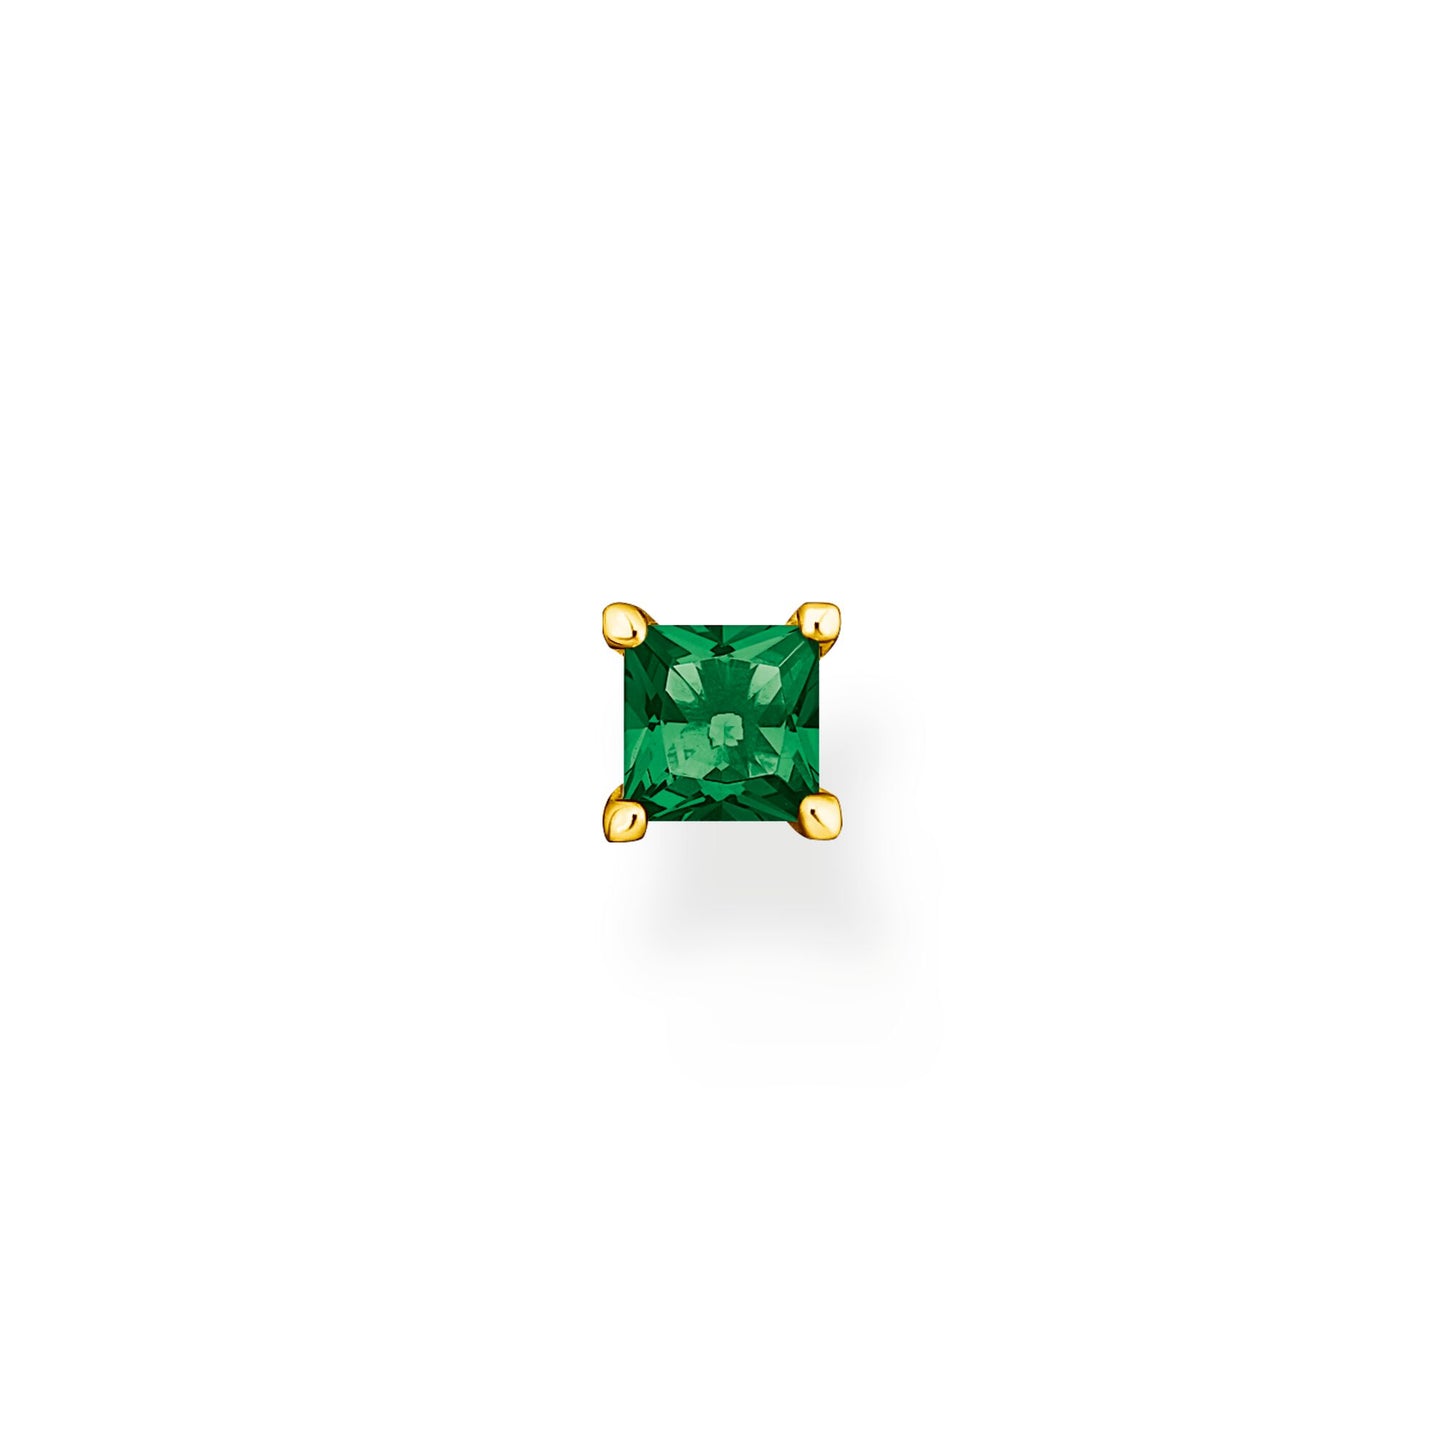 Thomas Sabo Single Ear Stud With Green Stone Gold H2233-476-6